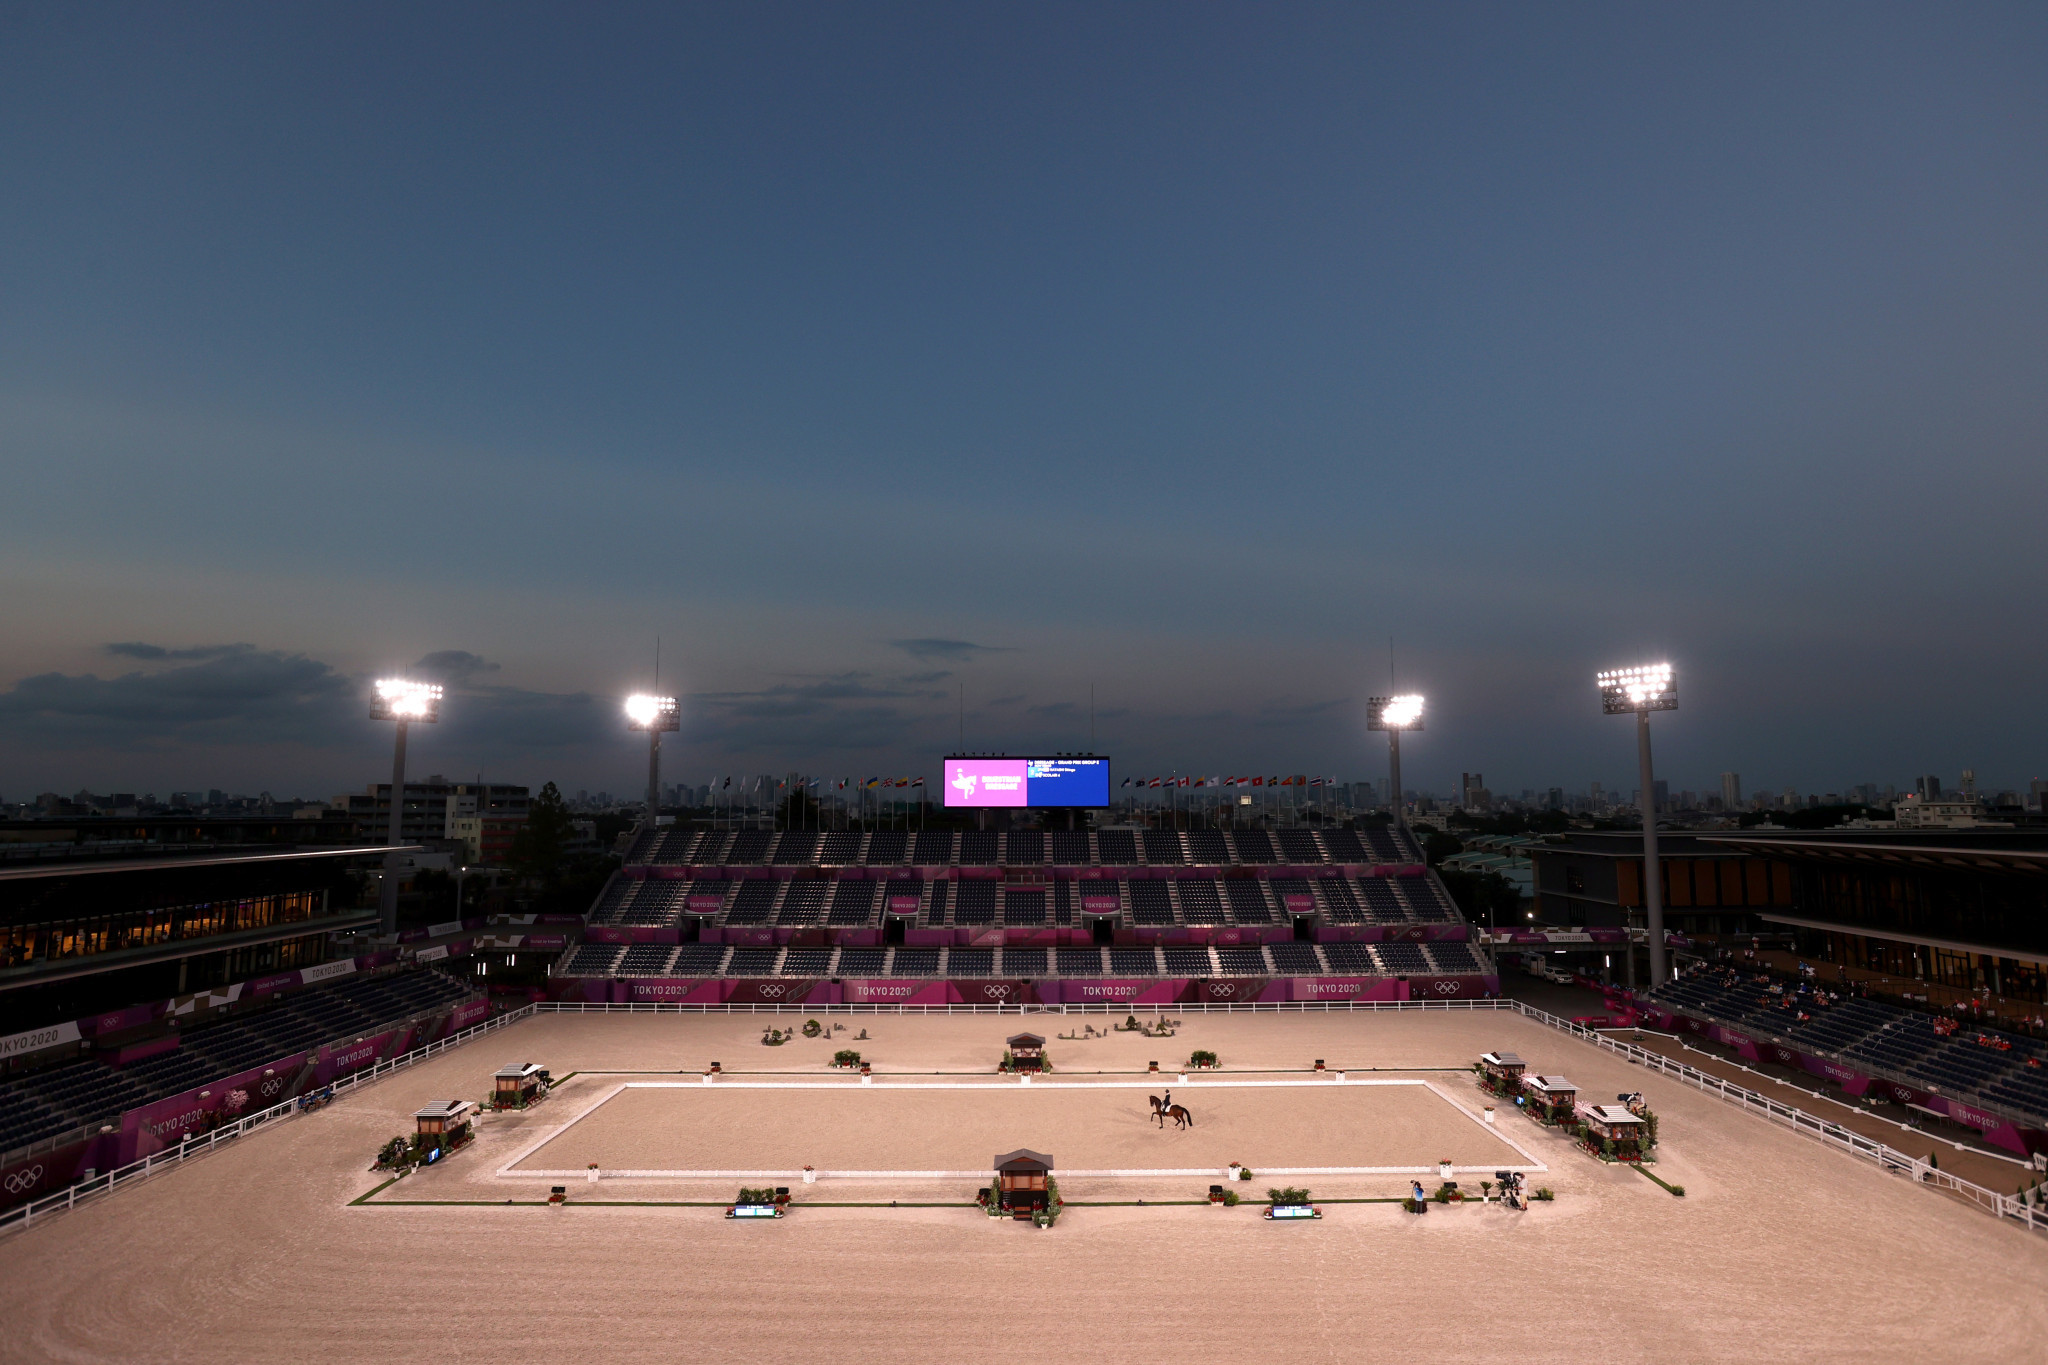 Tokyo 2020 venue to be used for equestrian at Aichi-Nagoya 2026 Asian Games